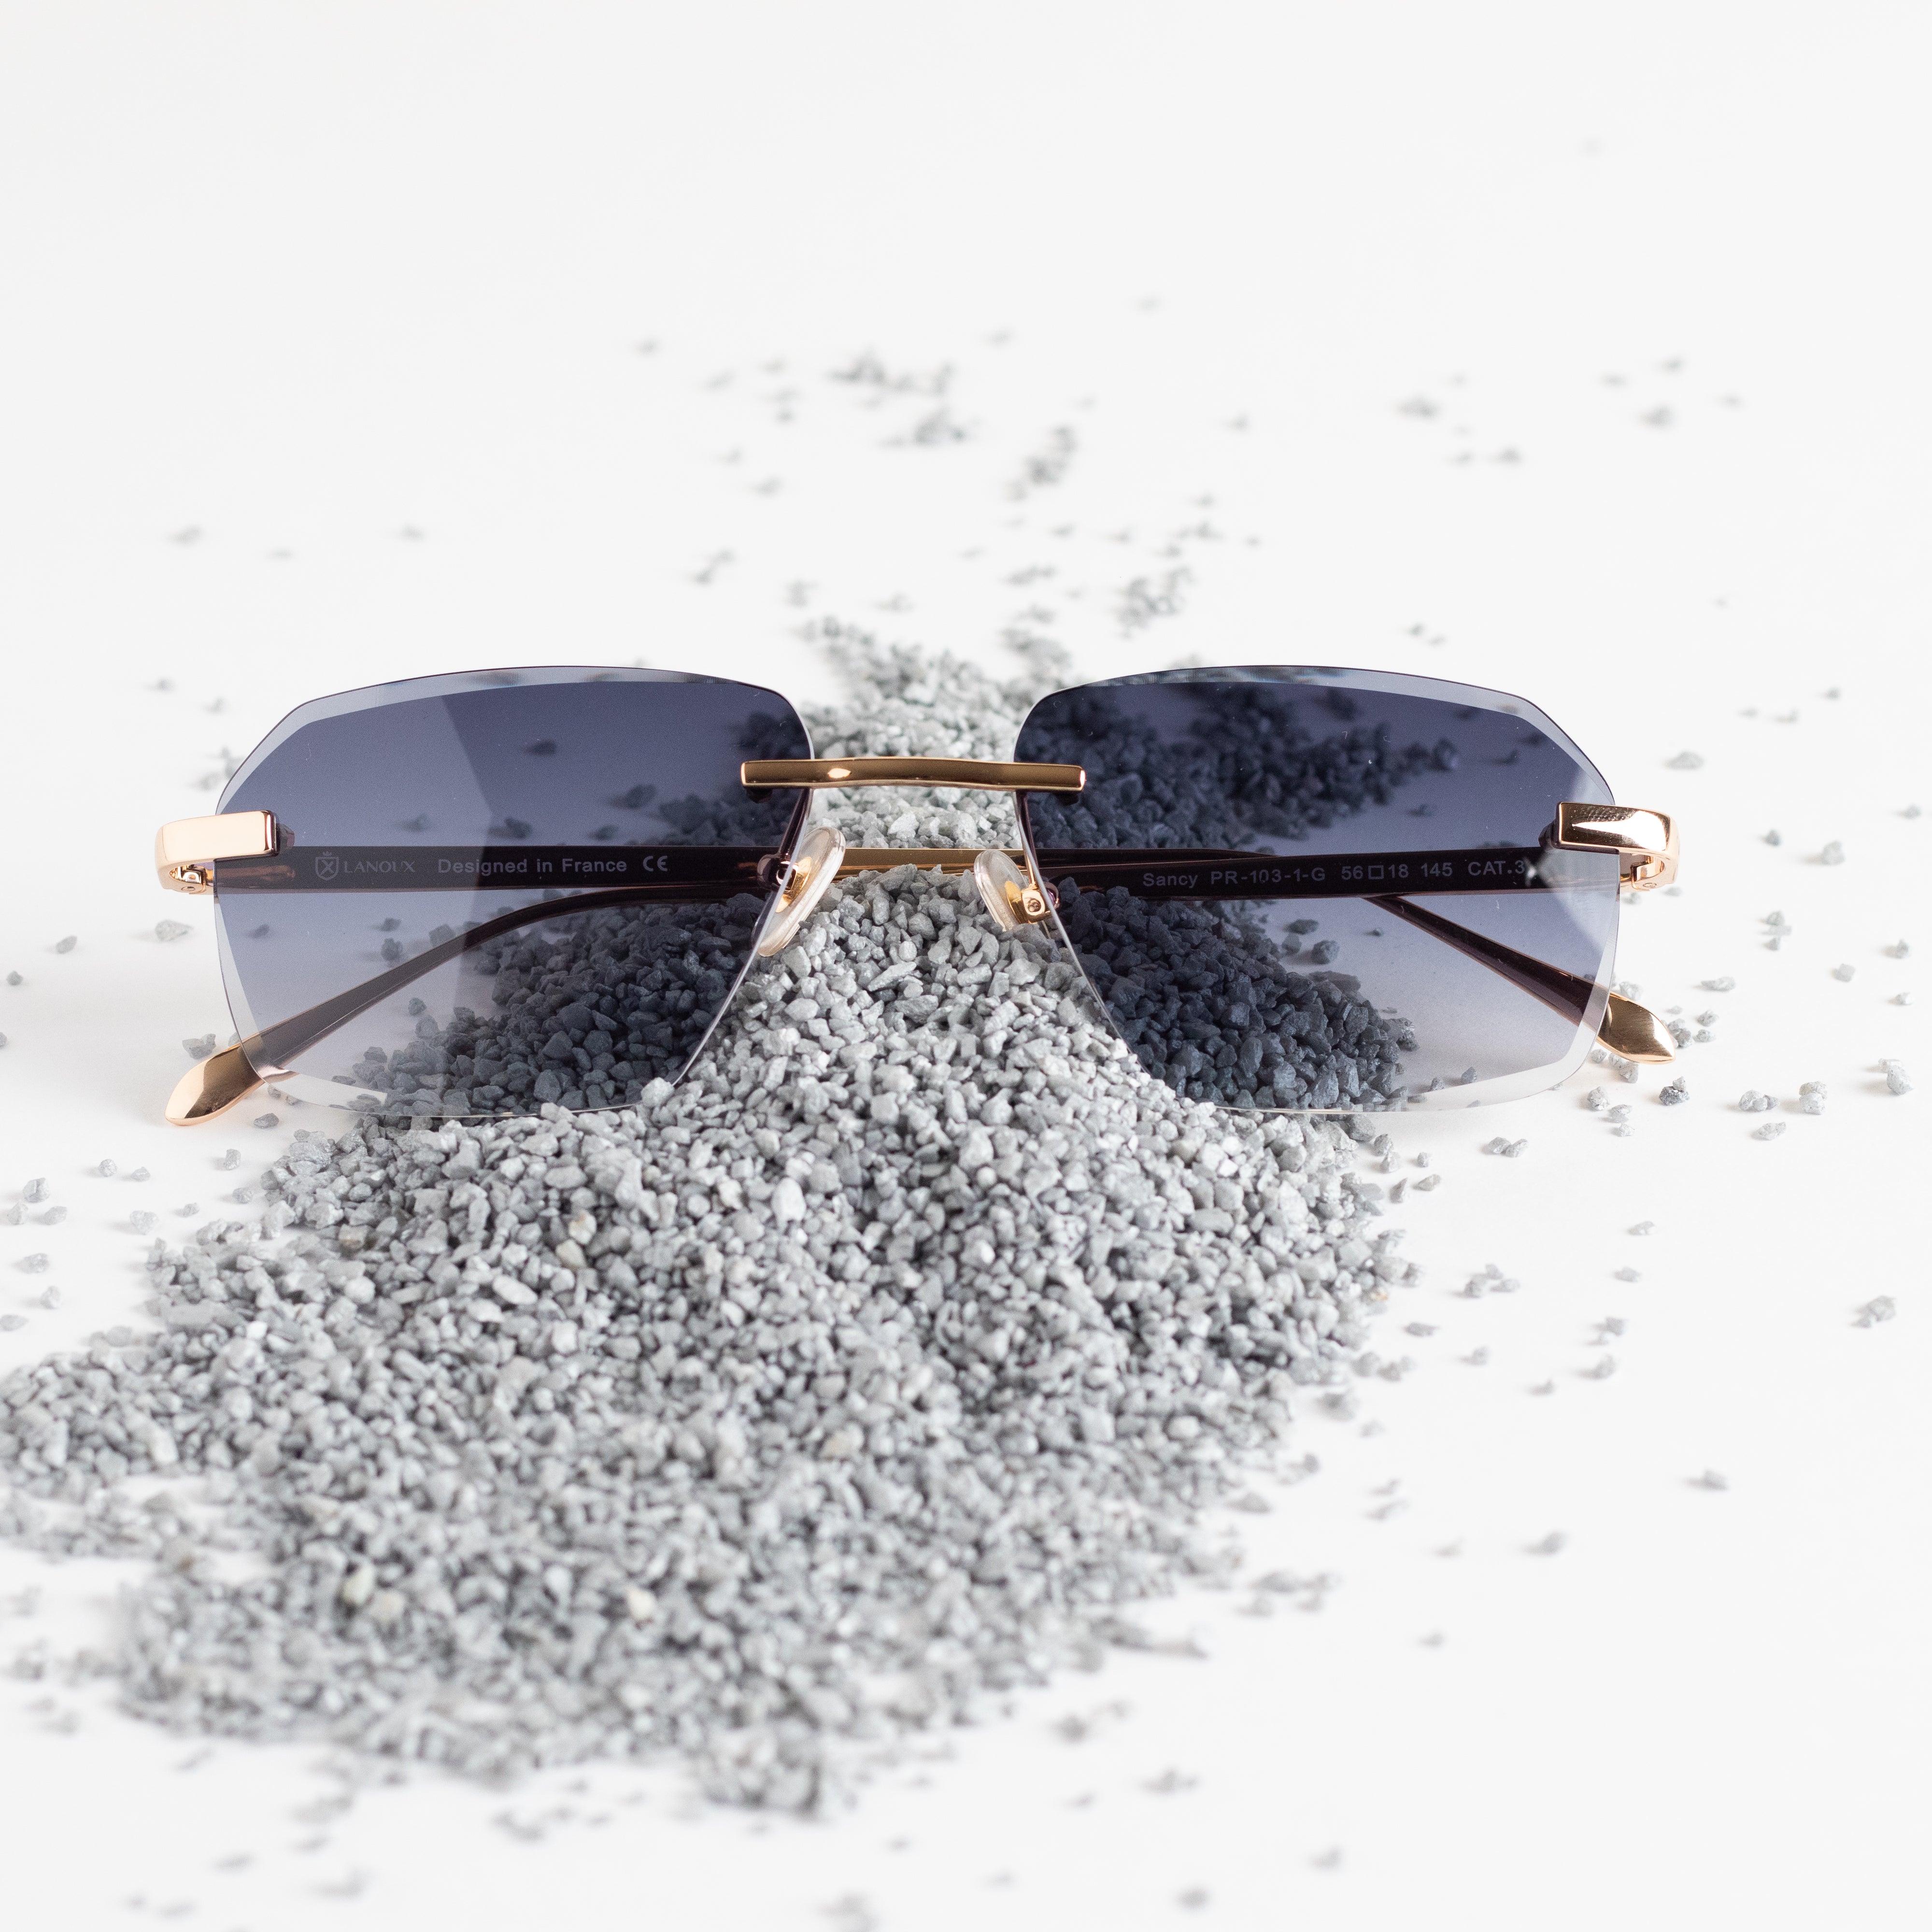 he 'Sancy' sunglasses, poised on a speckled grey surface, feature gradient grey lenses and illustrious 18k gold frames with a diamond cut finish. The refined aesthetic of the glasses is accentuated by the contrasting granular texture beneath them, illustrating the fusion of craftsmanship and sophisticated style.